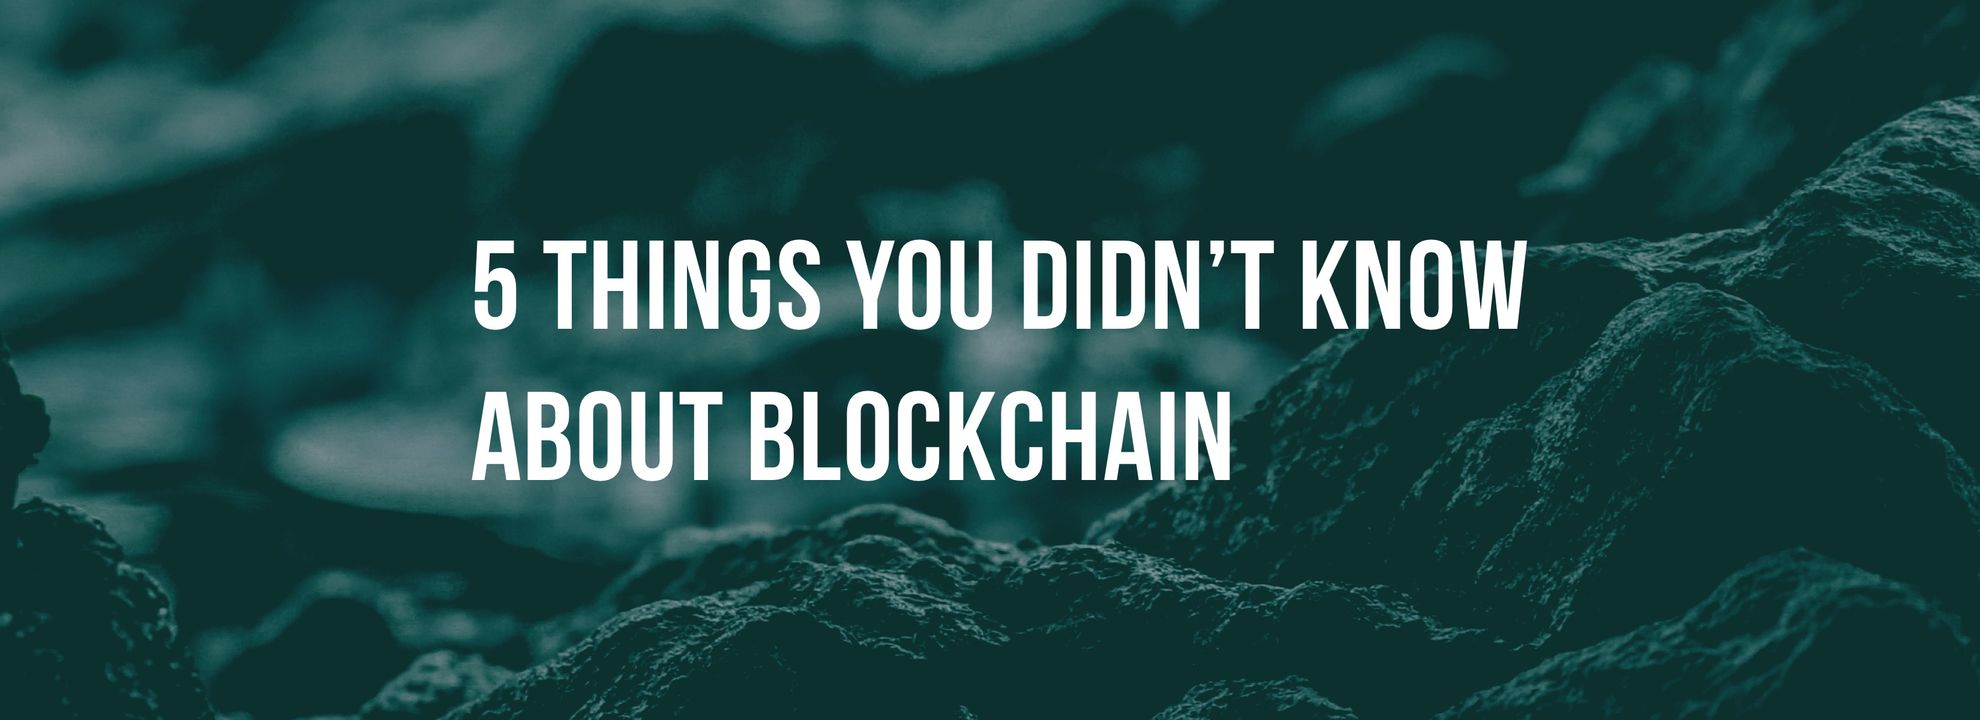 5 things you didn't know about blockchain